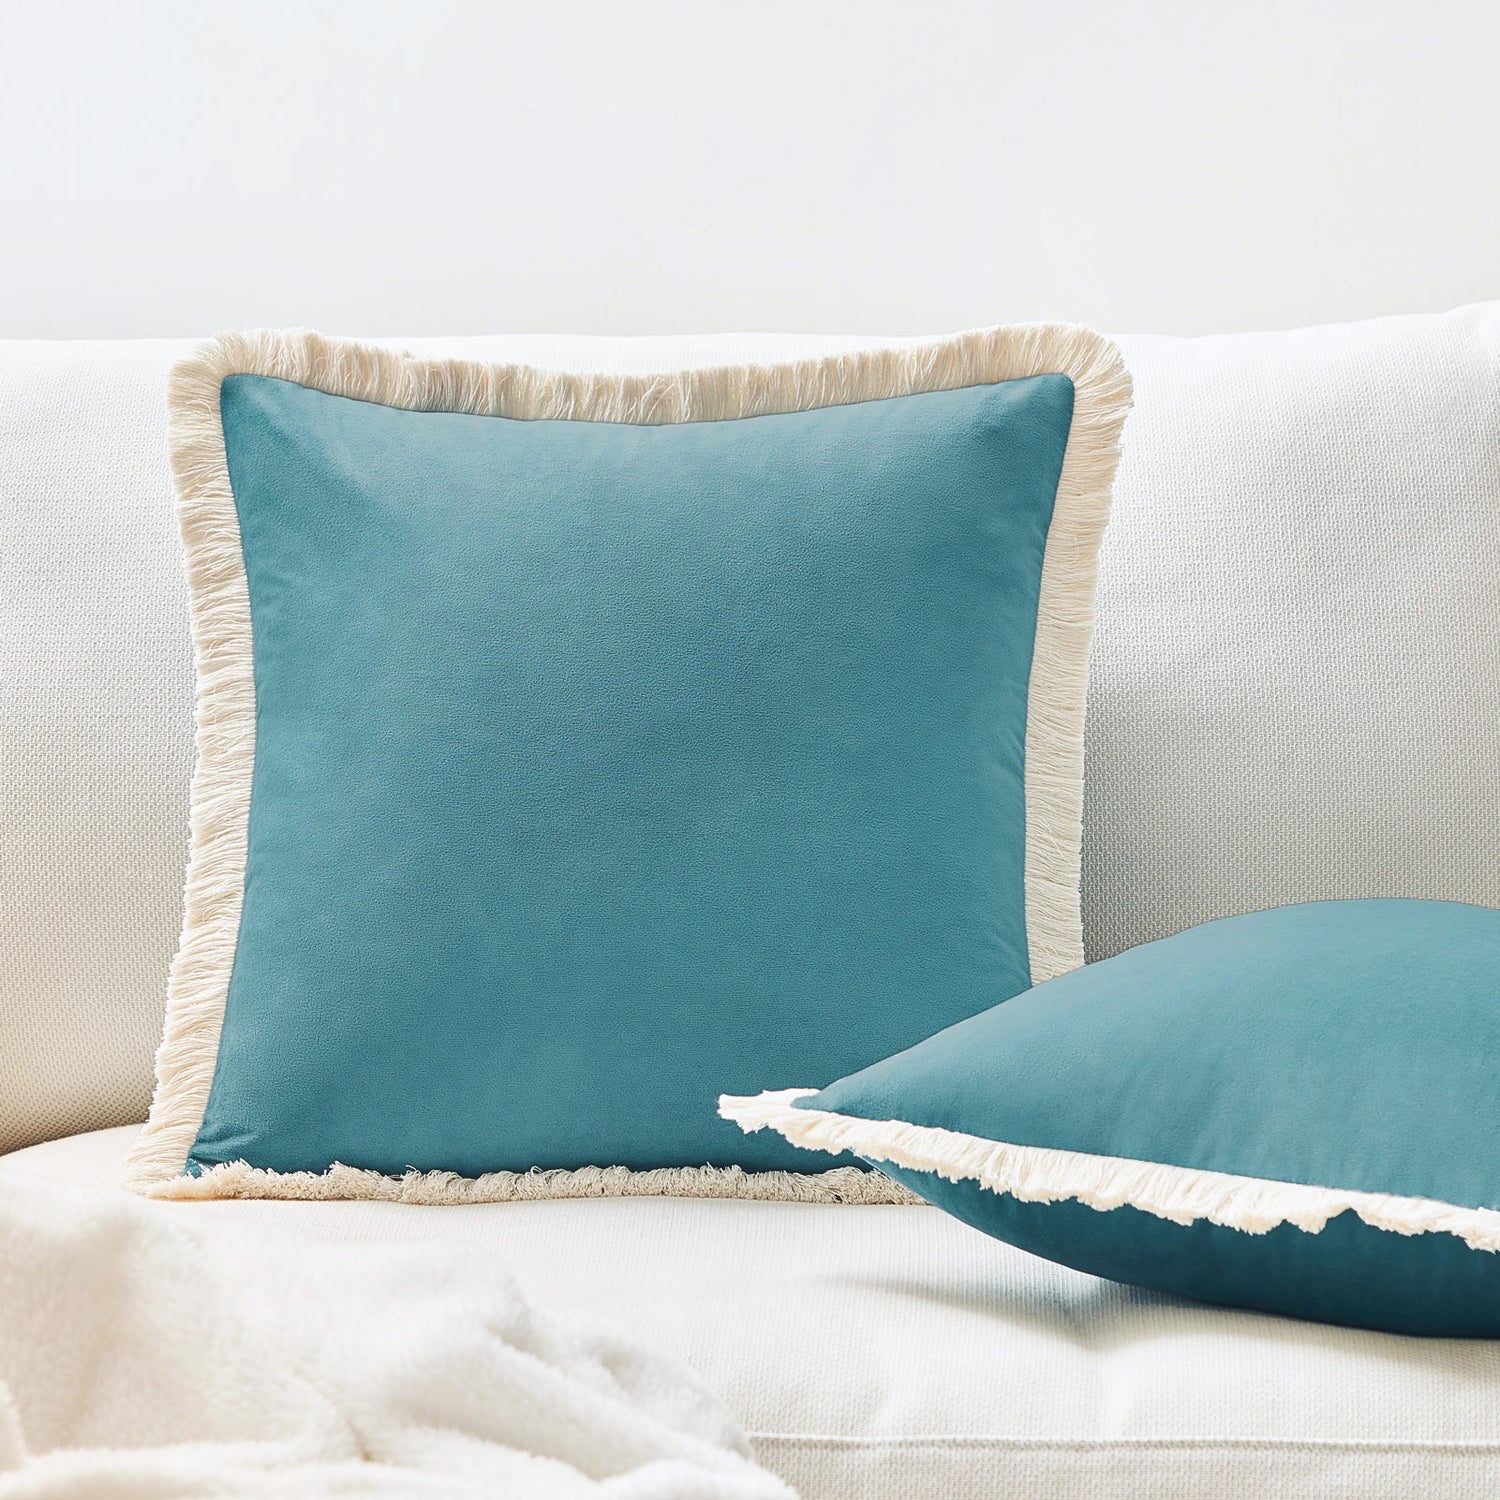 velvet decorative throw pillow covers  with fringe border set of 2 teal blue color